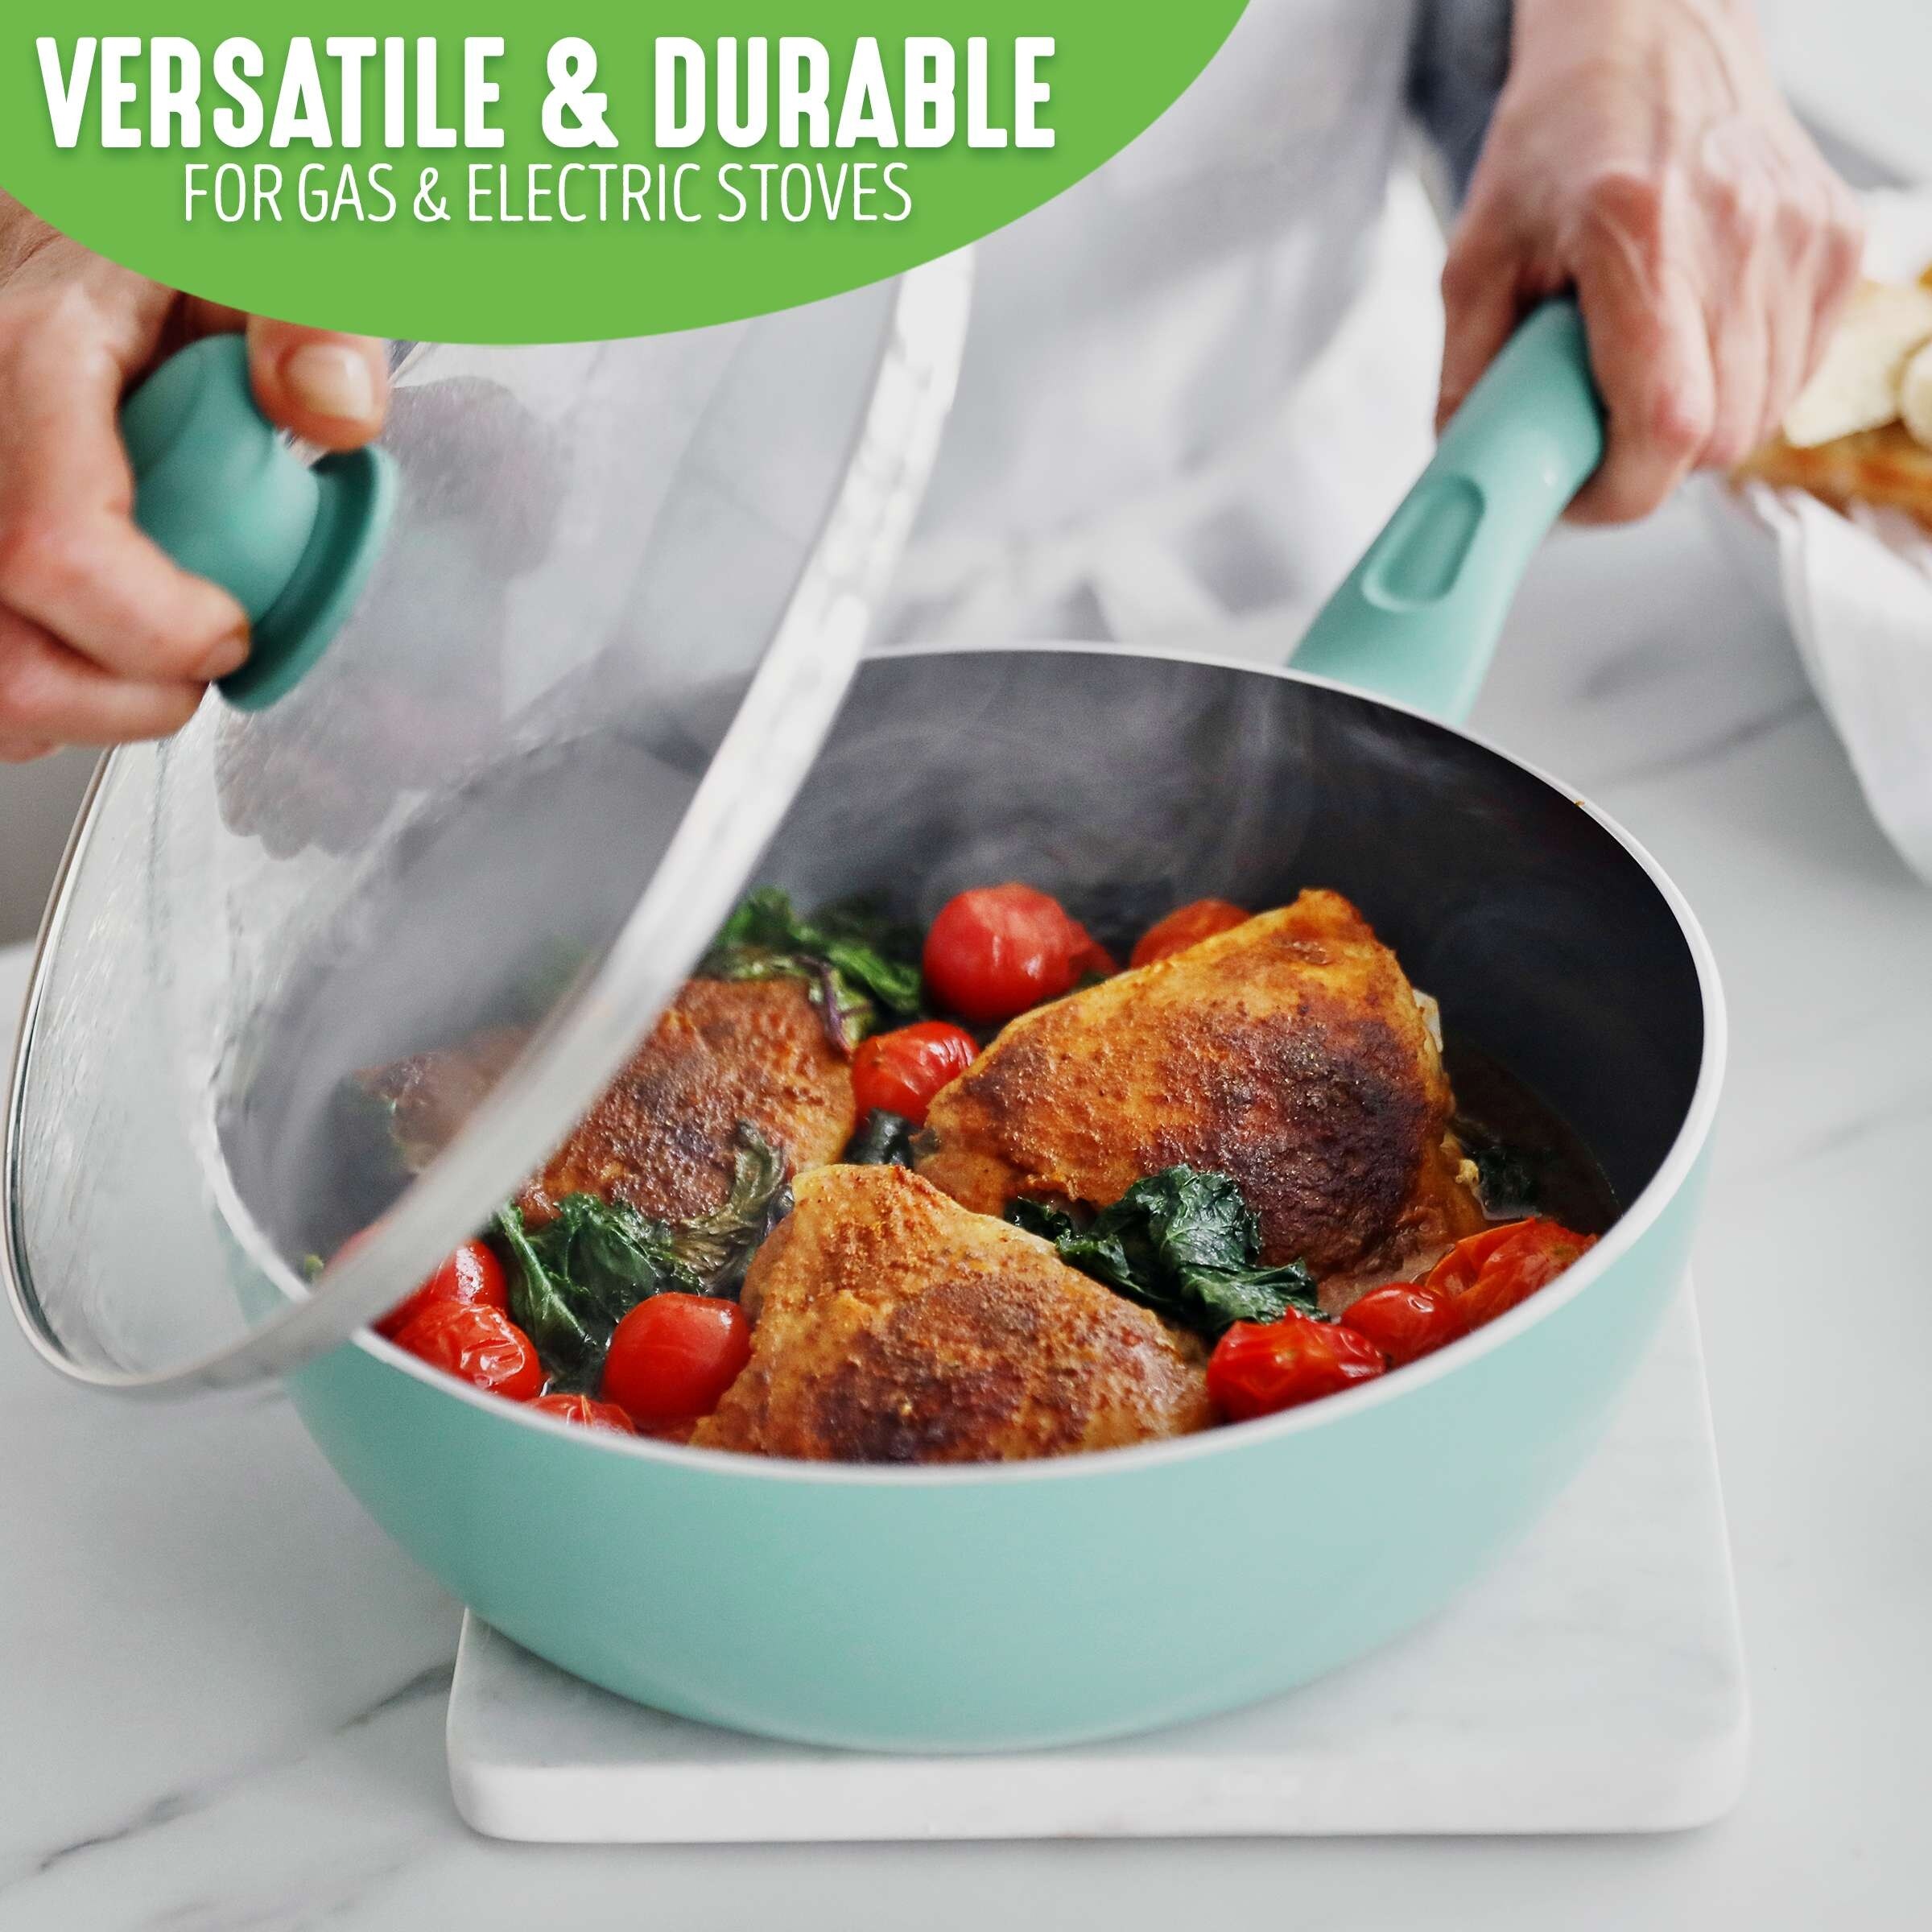 https://ak1.ostkcdn.com/images/products/is/images/direct/8b6bc9ec7fa01899884c98918190069e8b9a392a/GreenLife-Savory-3QT-Covered-Chef%27s-Pan.jpg